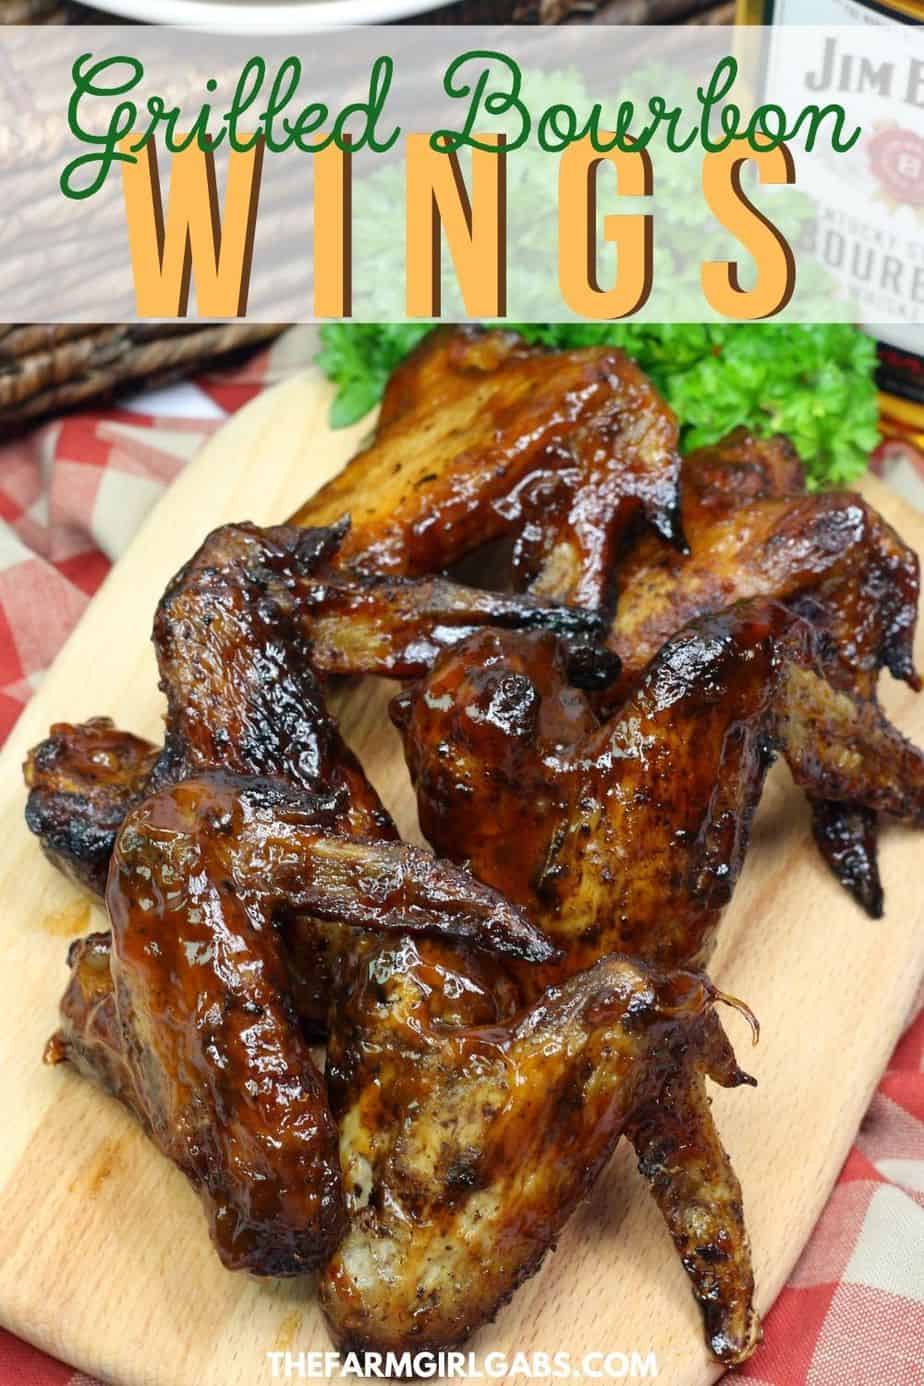 Grilled Bourbon Chicken Wings - The Farm Girl Gabs®